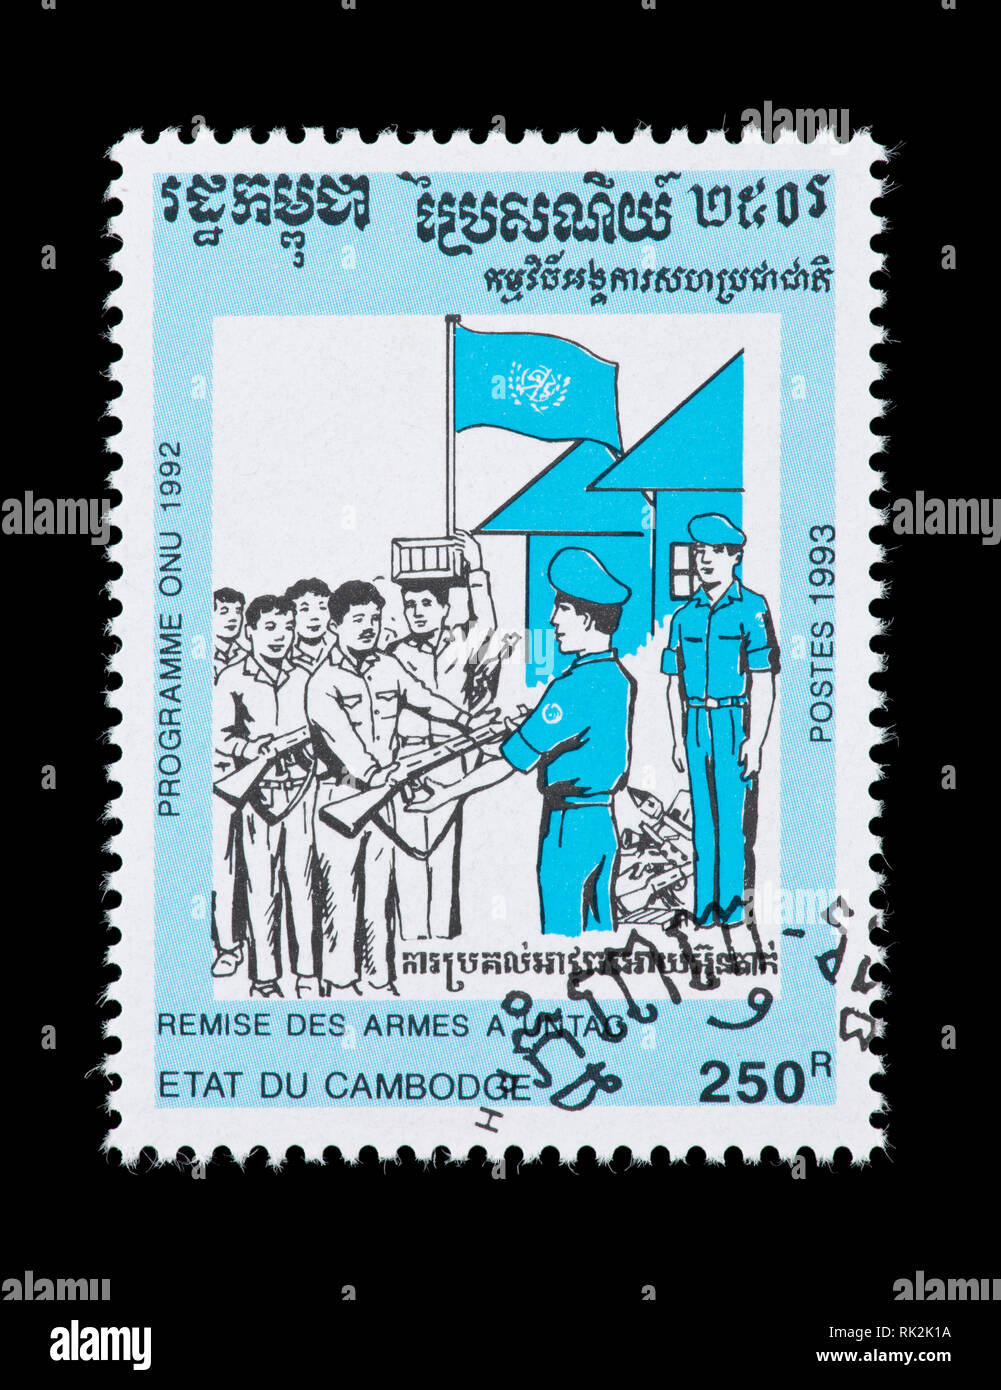 Postage stamp from Cambodia depicting troops surrendering weapons to the United Nations, UN Transitional Authority in Cambodia (UNTAC) Stock Photo